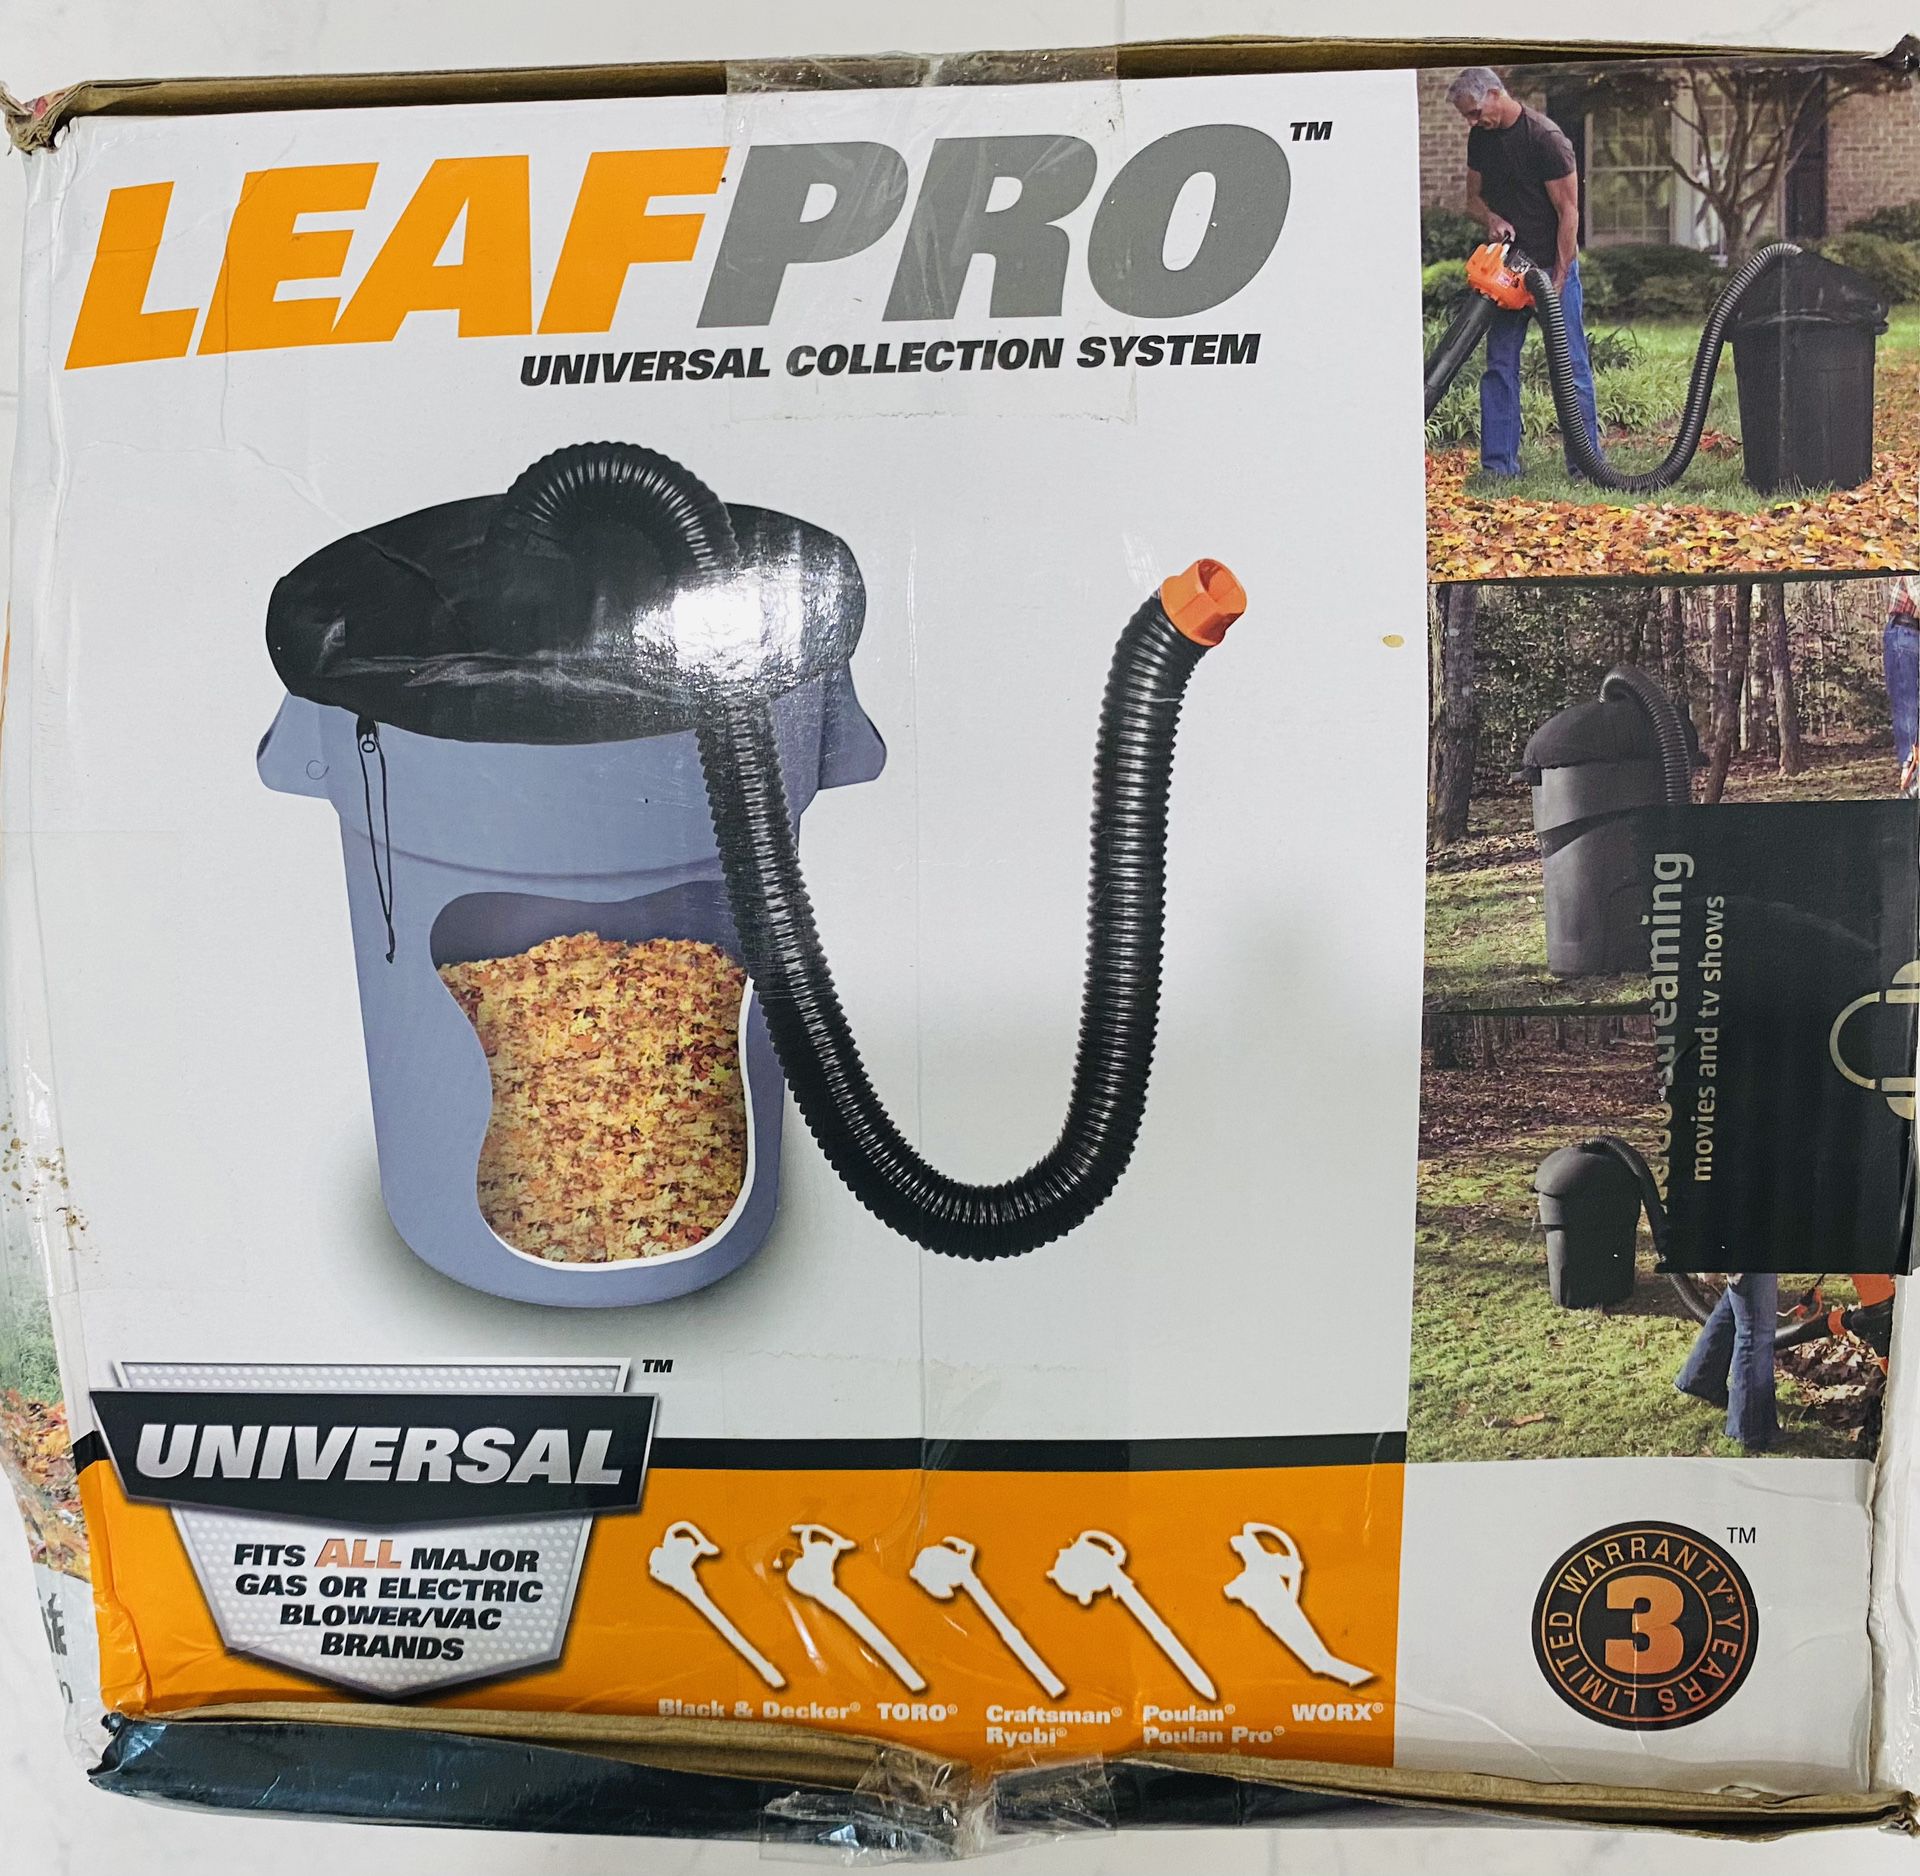 WORX LeafPro Universal Leaf Collection System for All Major Blower/Vac Brands - New In Box!